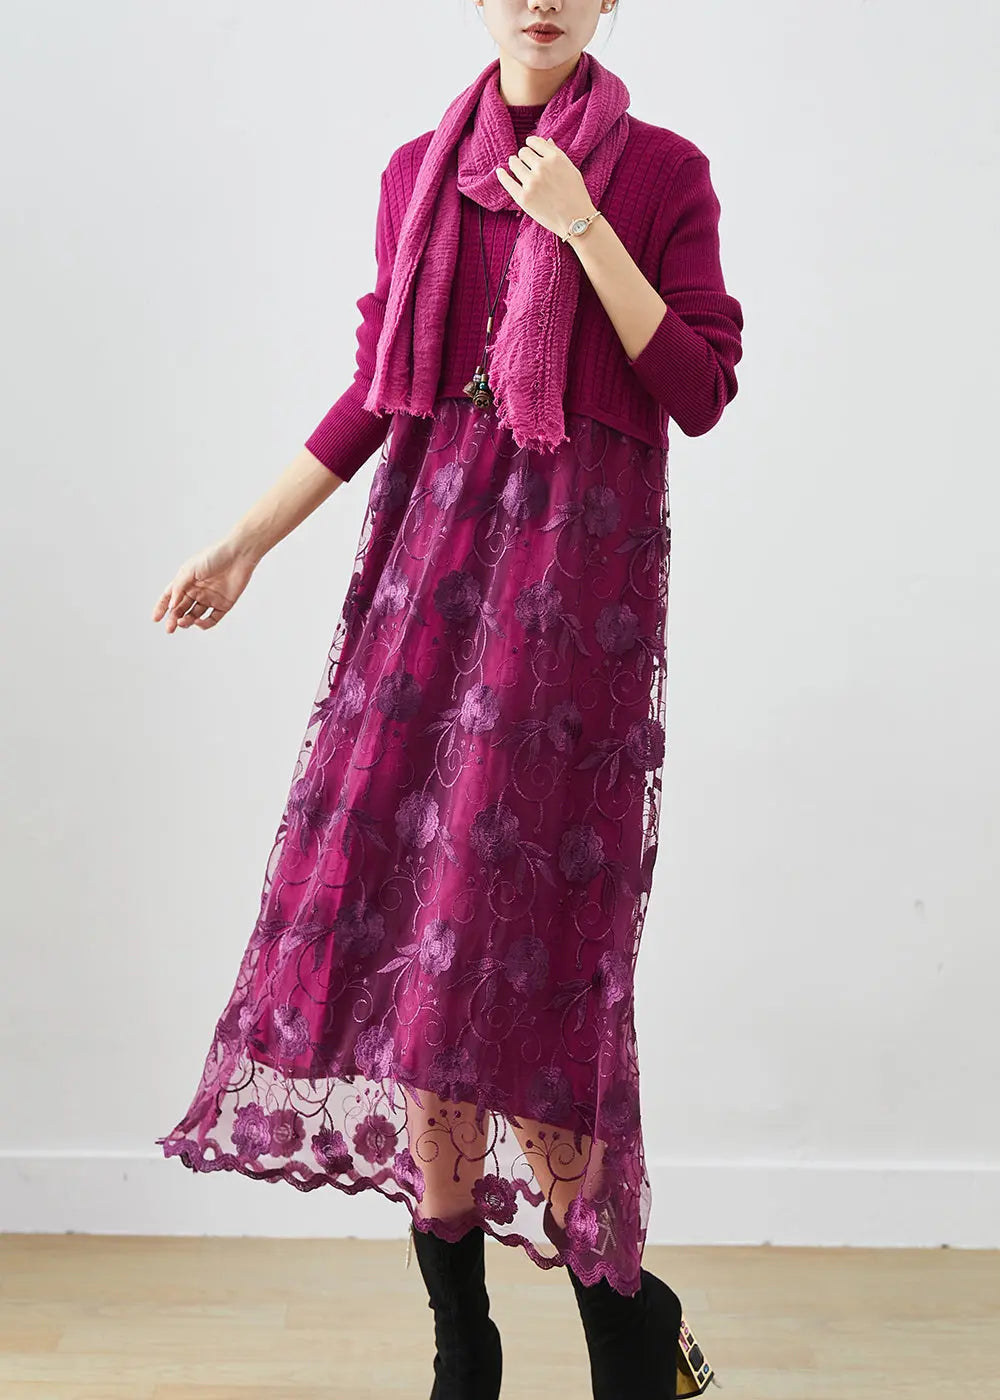 French Purple Embroideried Patchwork Knit Vacation Dresses Fall Ada Fashion